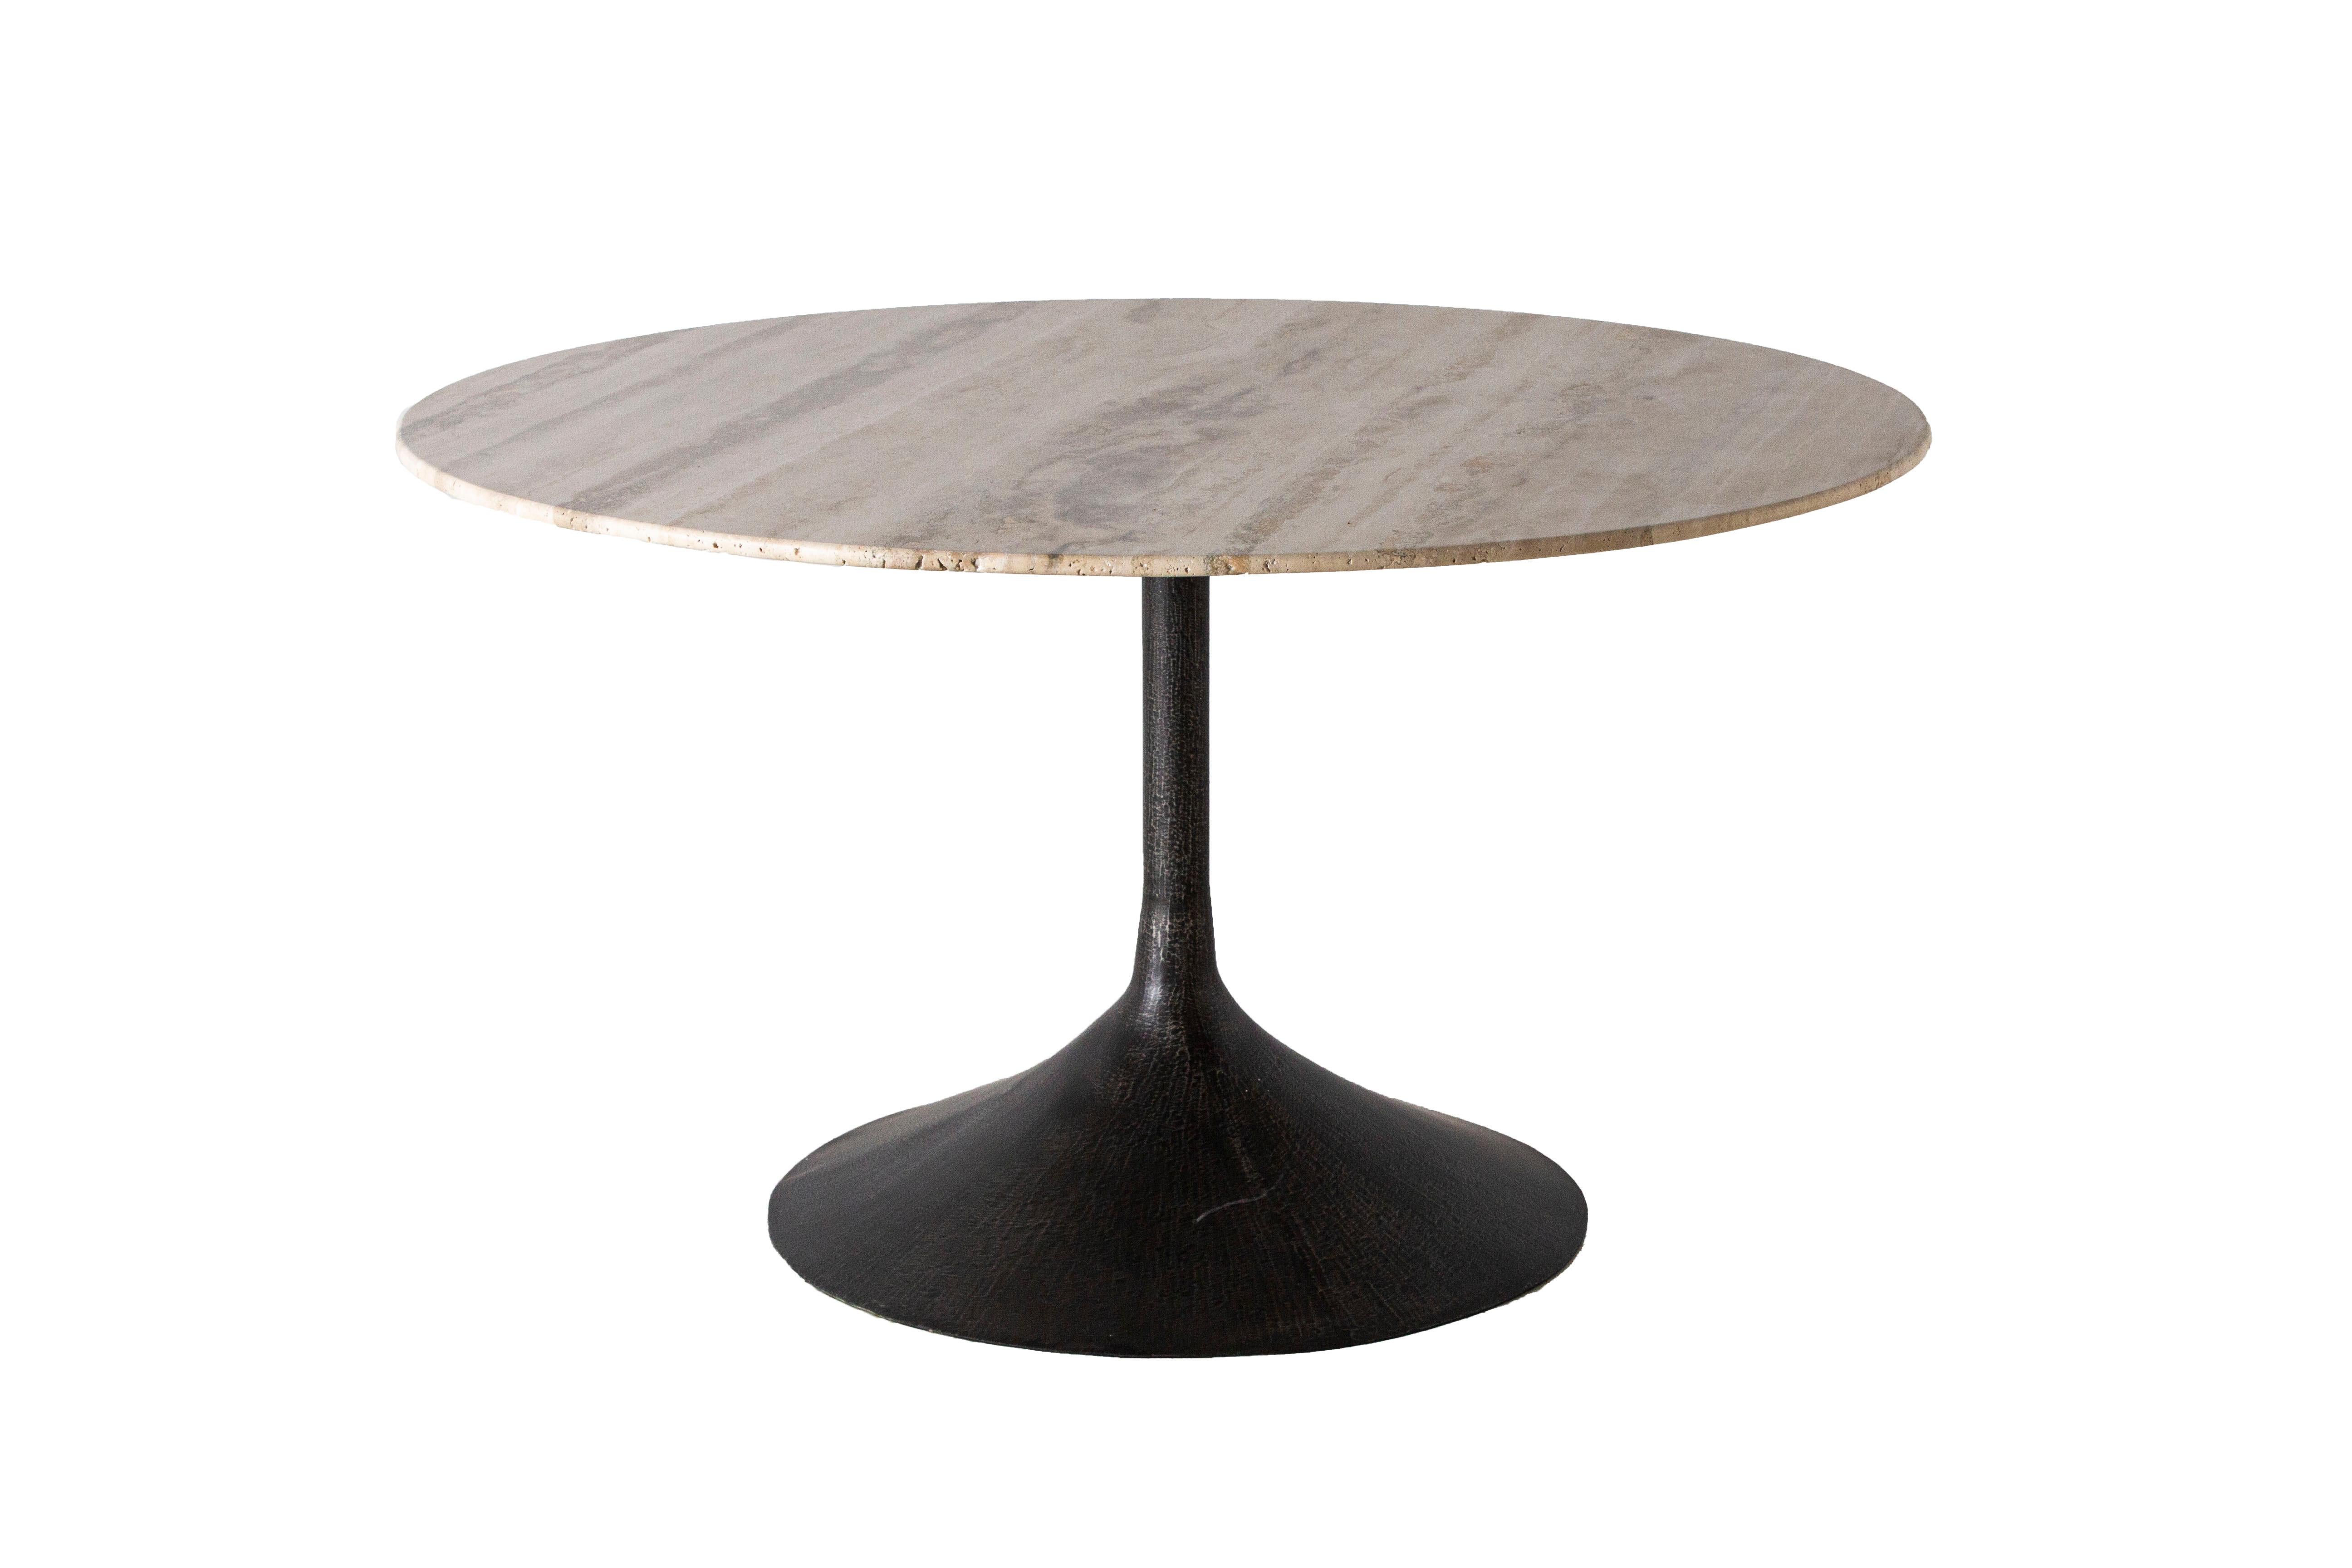 Top: Silver travertine honed with knoll edge
Base: Tulip base in Patina steel

Top and base can be sold separately.

   